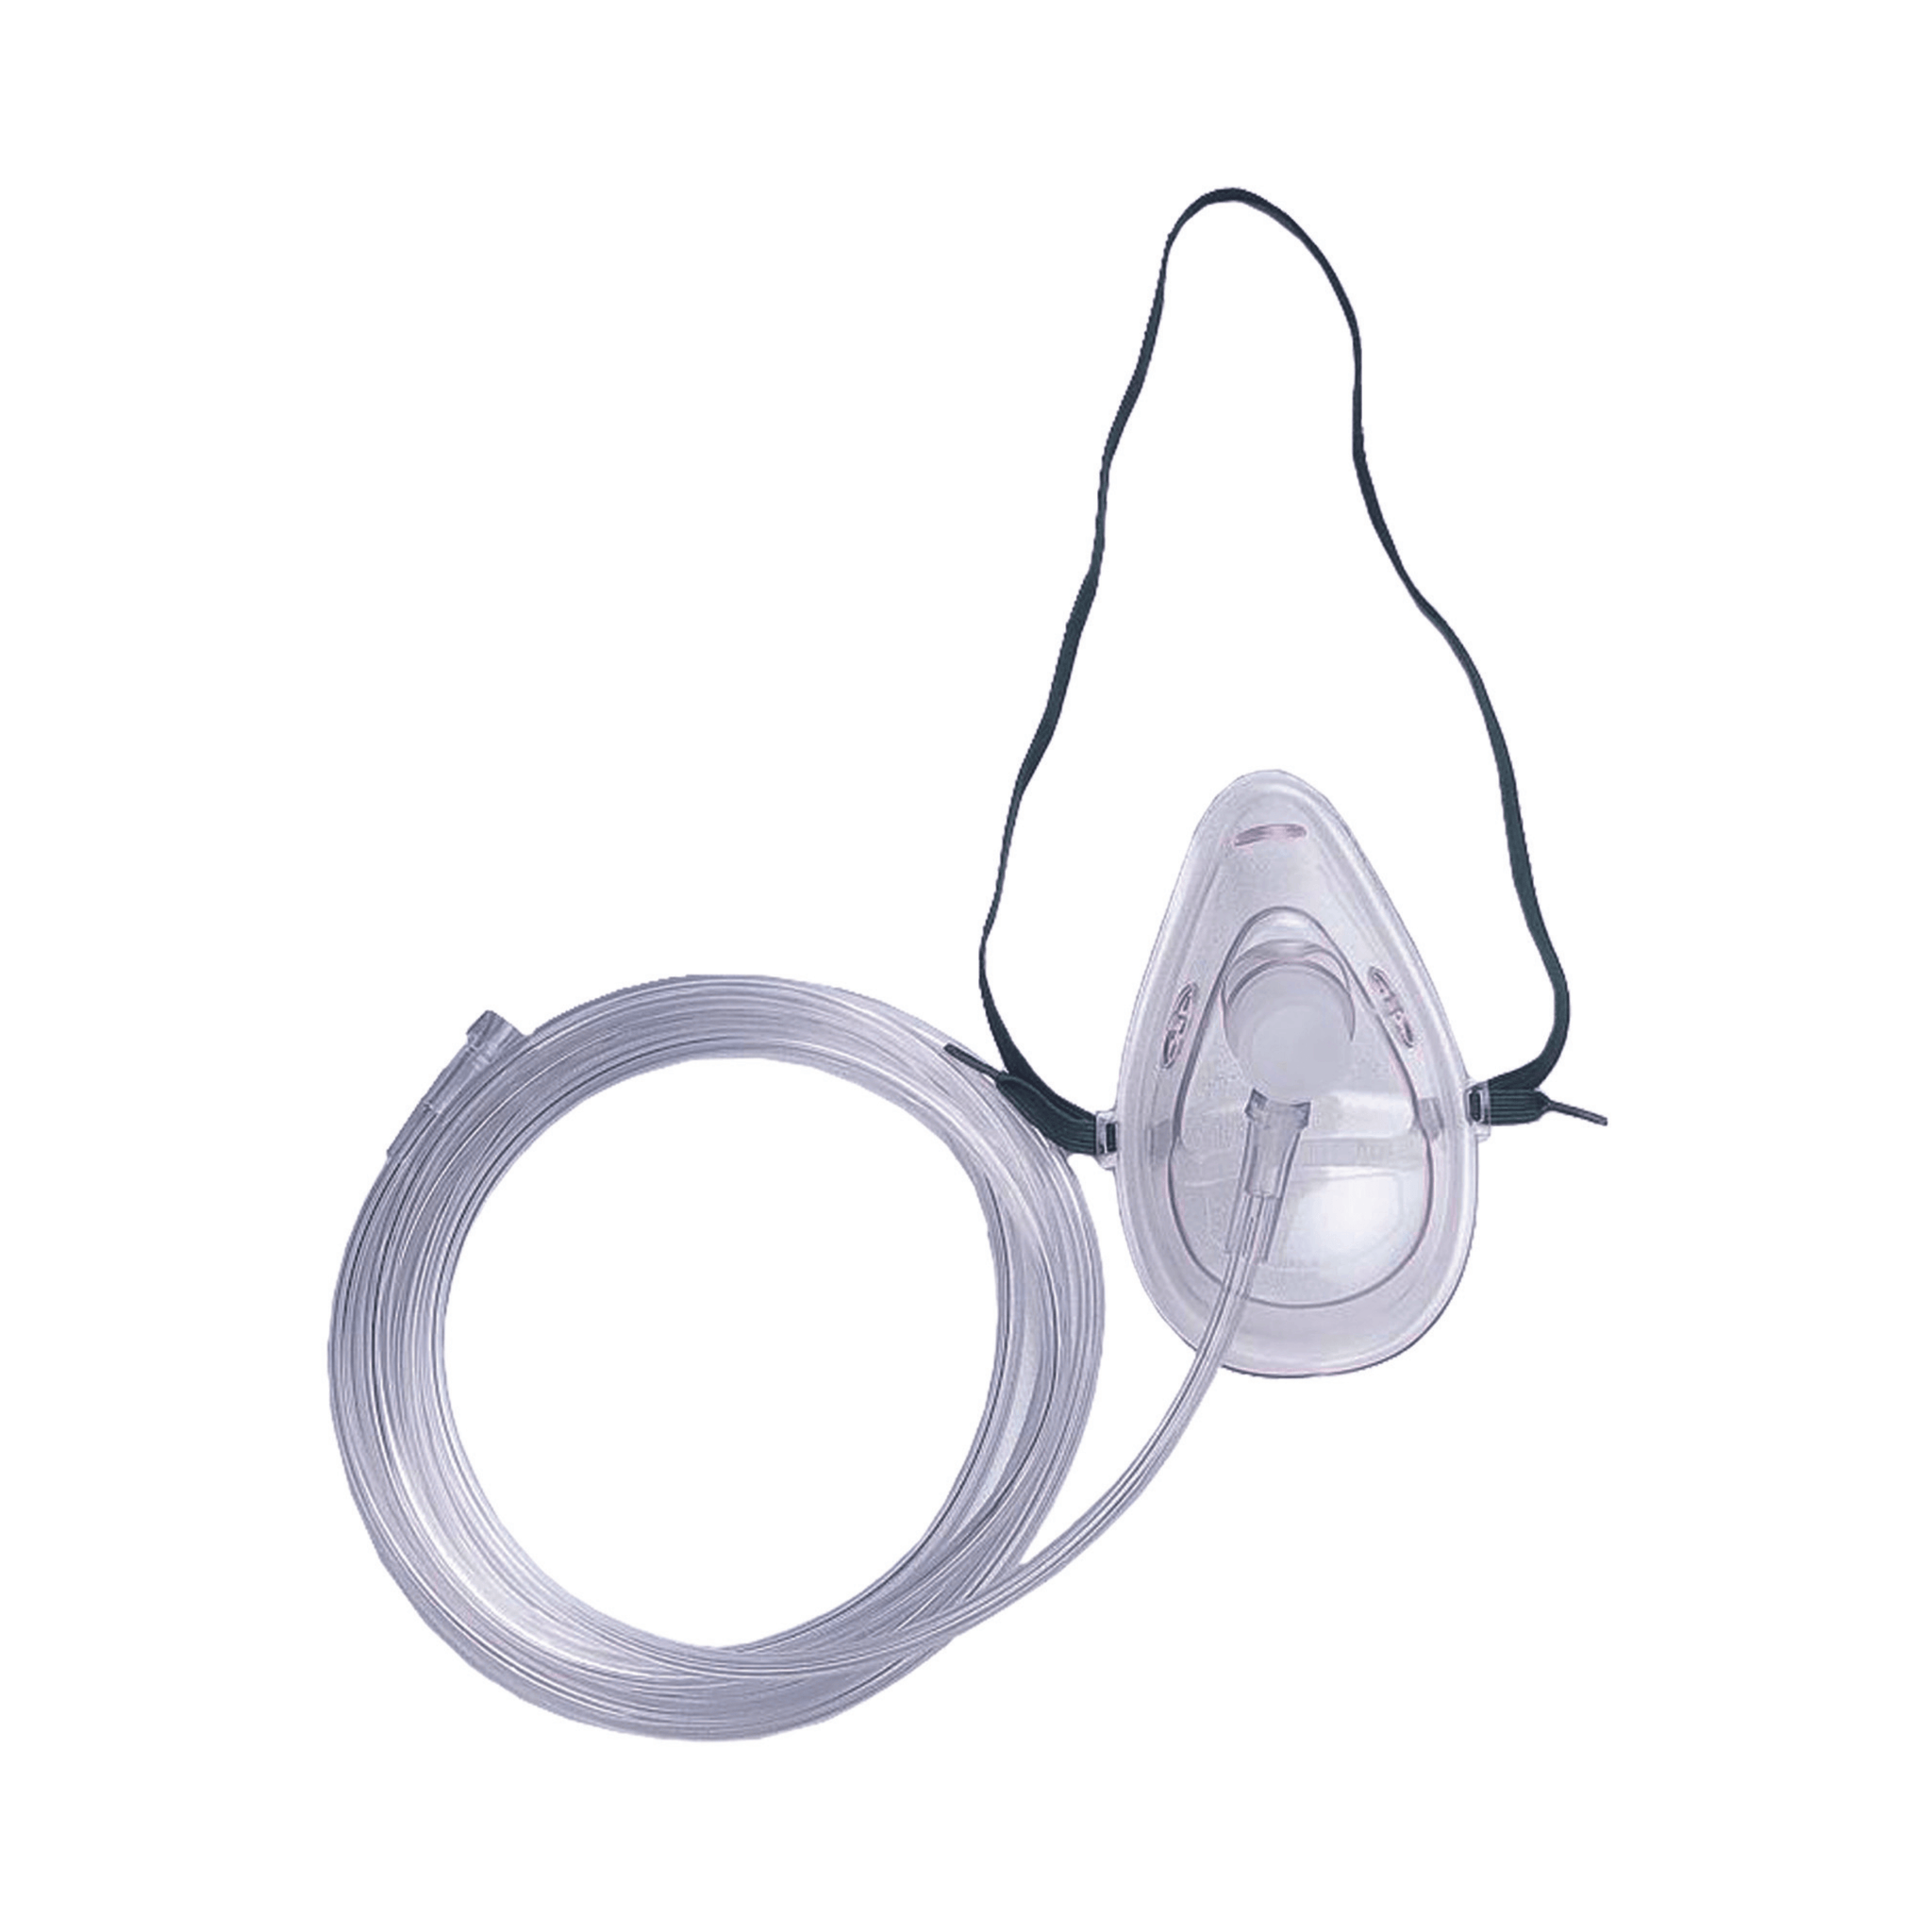 Oxygen Mask with Tubing - Adult